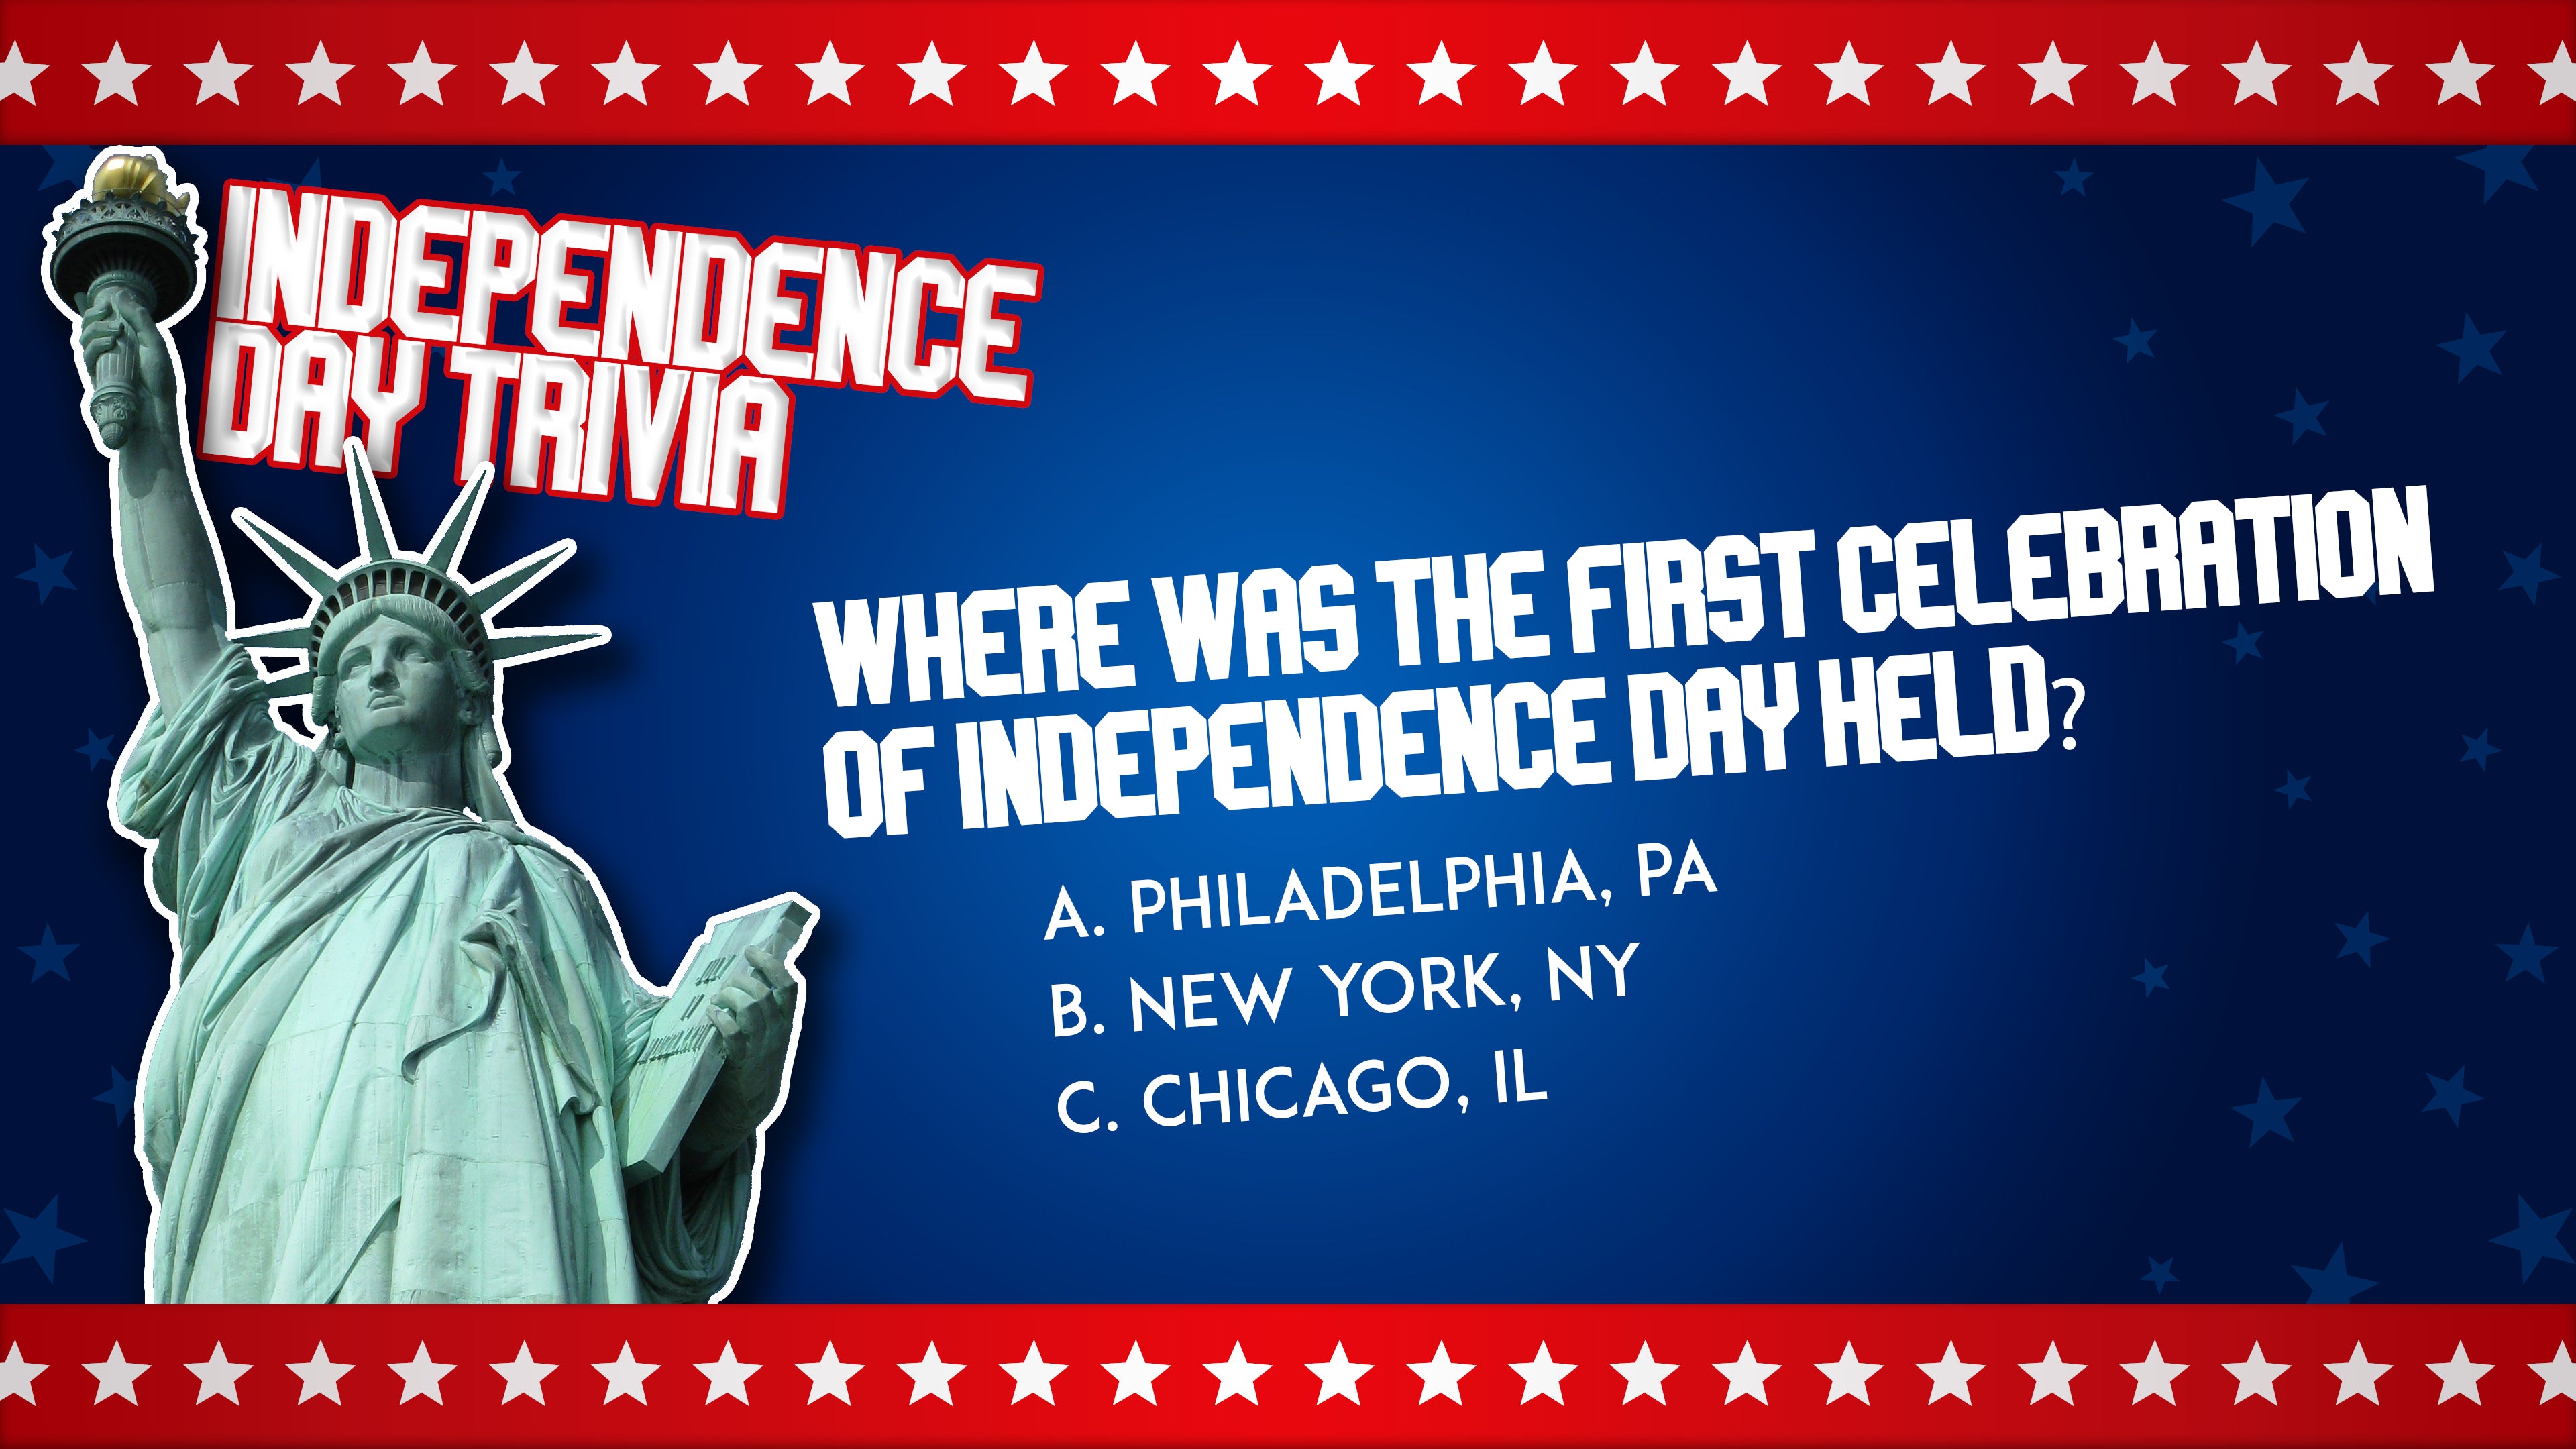 Independence Day Trivia